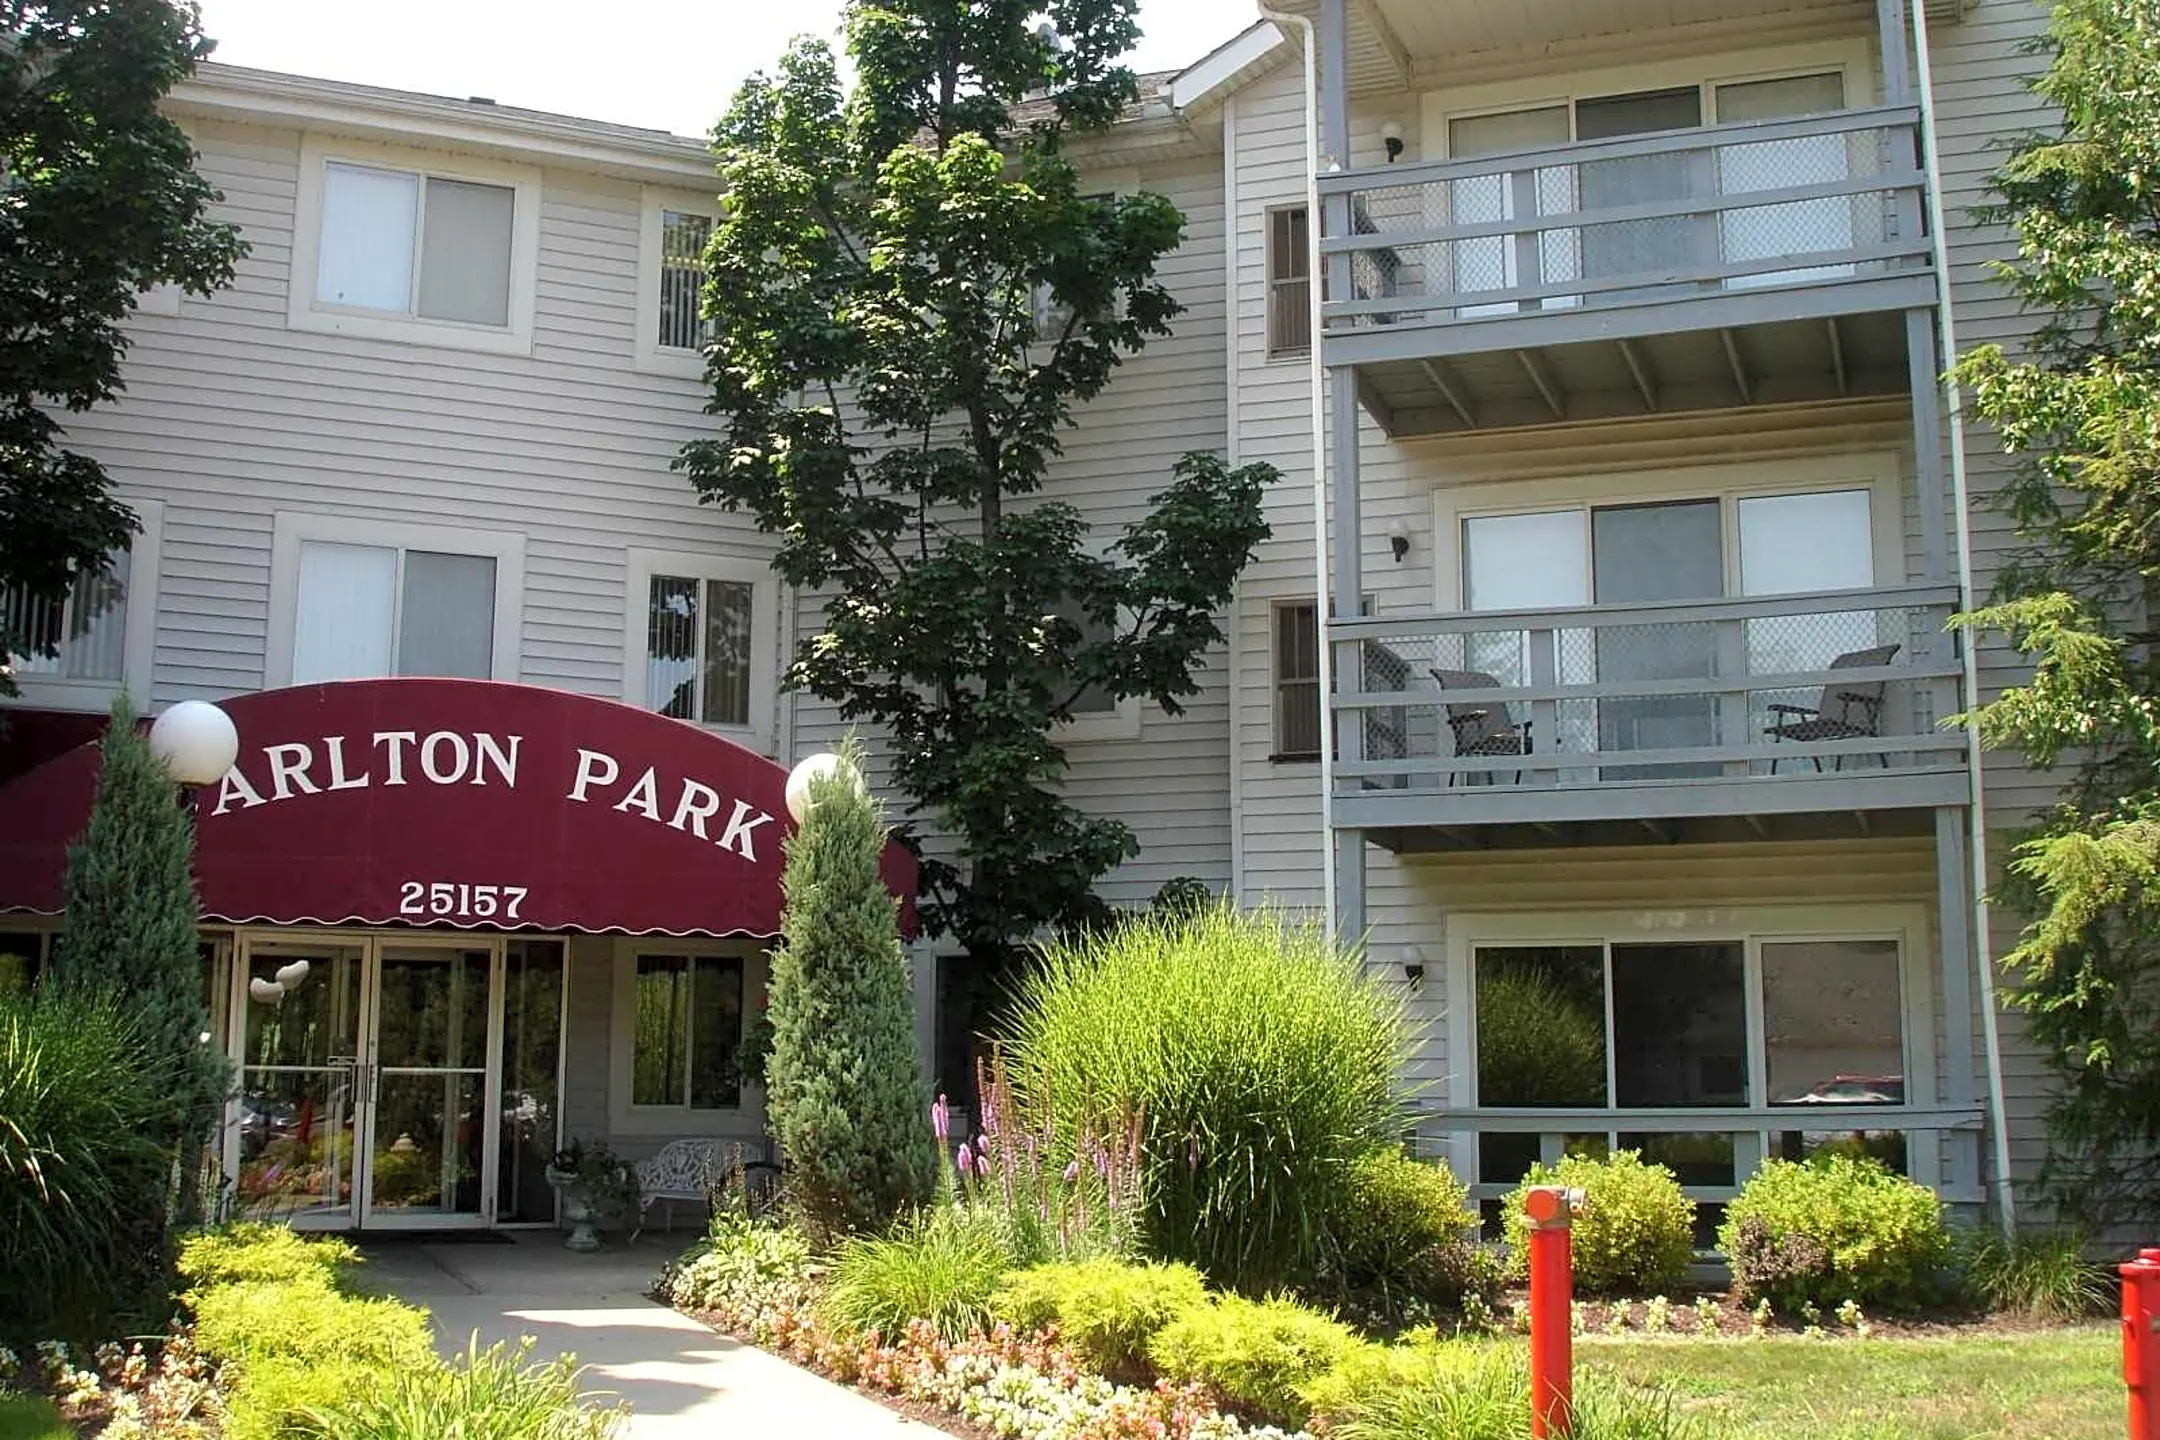 Carlton Park Apartments - North Olmsted, OH